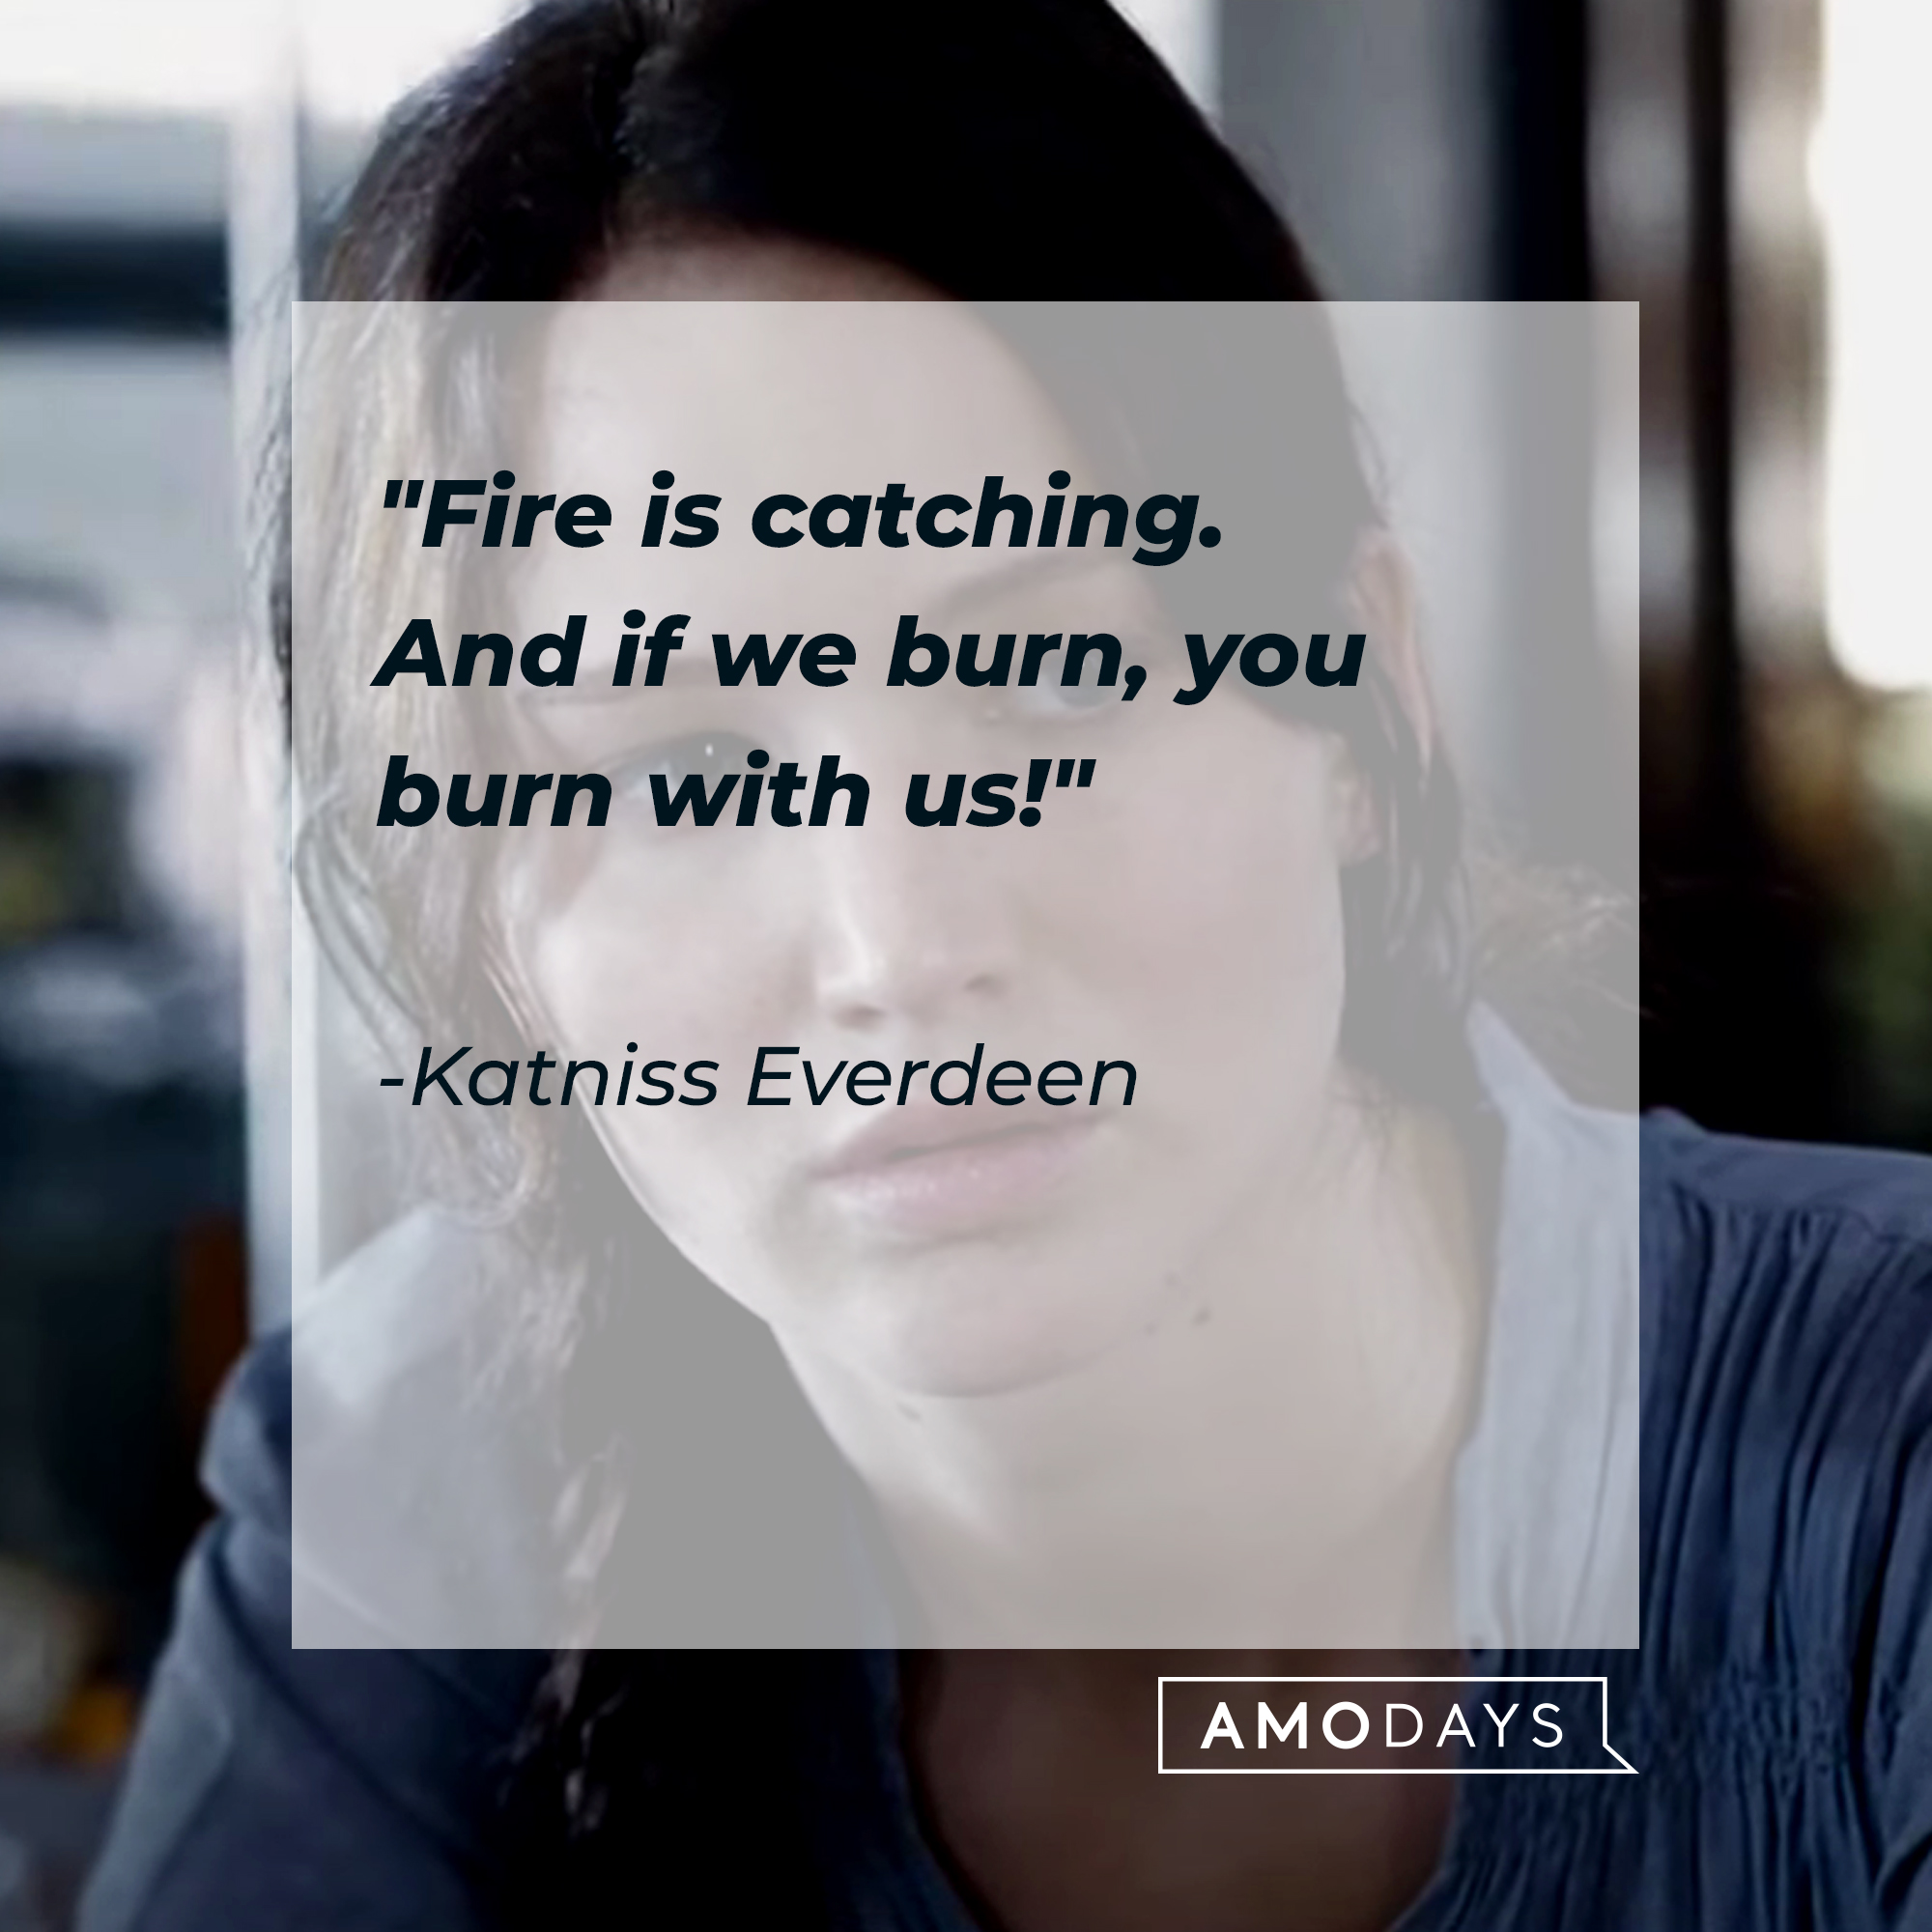 Katniss Everdeen, with her quote: “Fire is catching. And if we burn, you burn with us!" | Source: Youtube.com/TheHungerGamesMovies